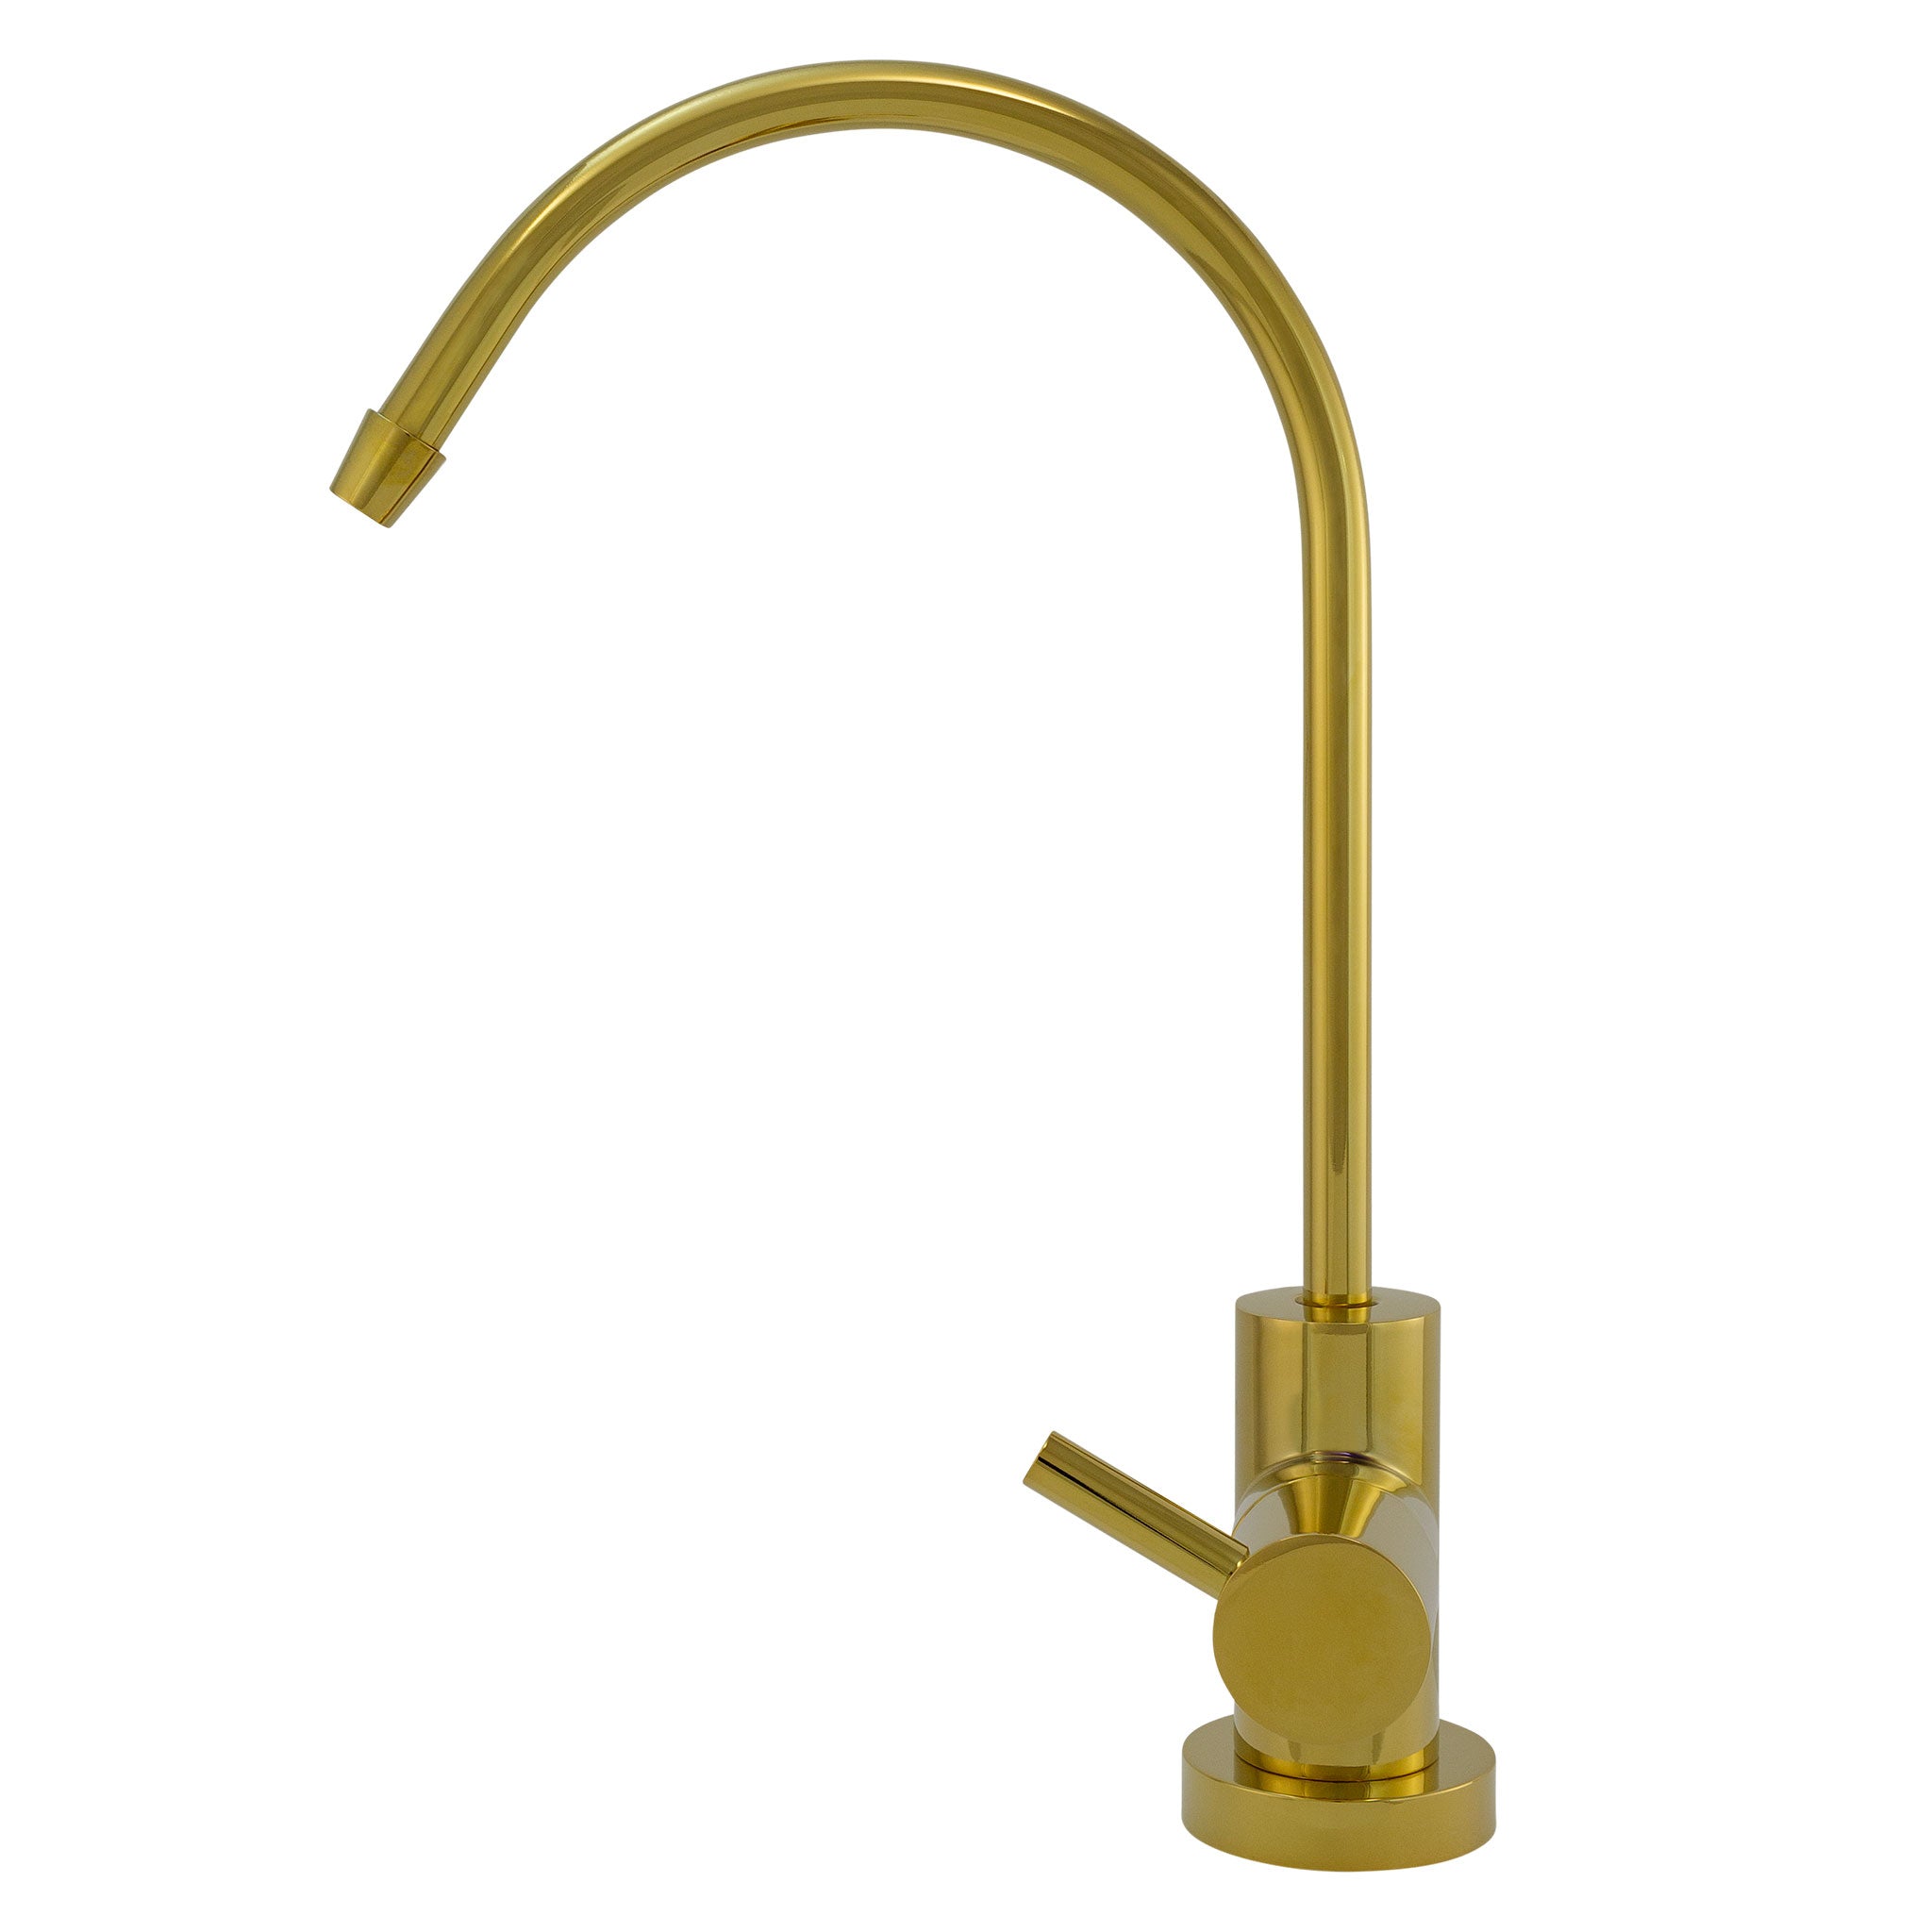 Water Filtration Faucet Bright Gold Euro Style Reverse Osmosis Non Air Gap. Certified by NSF.